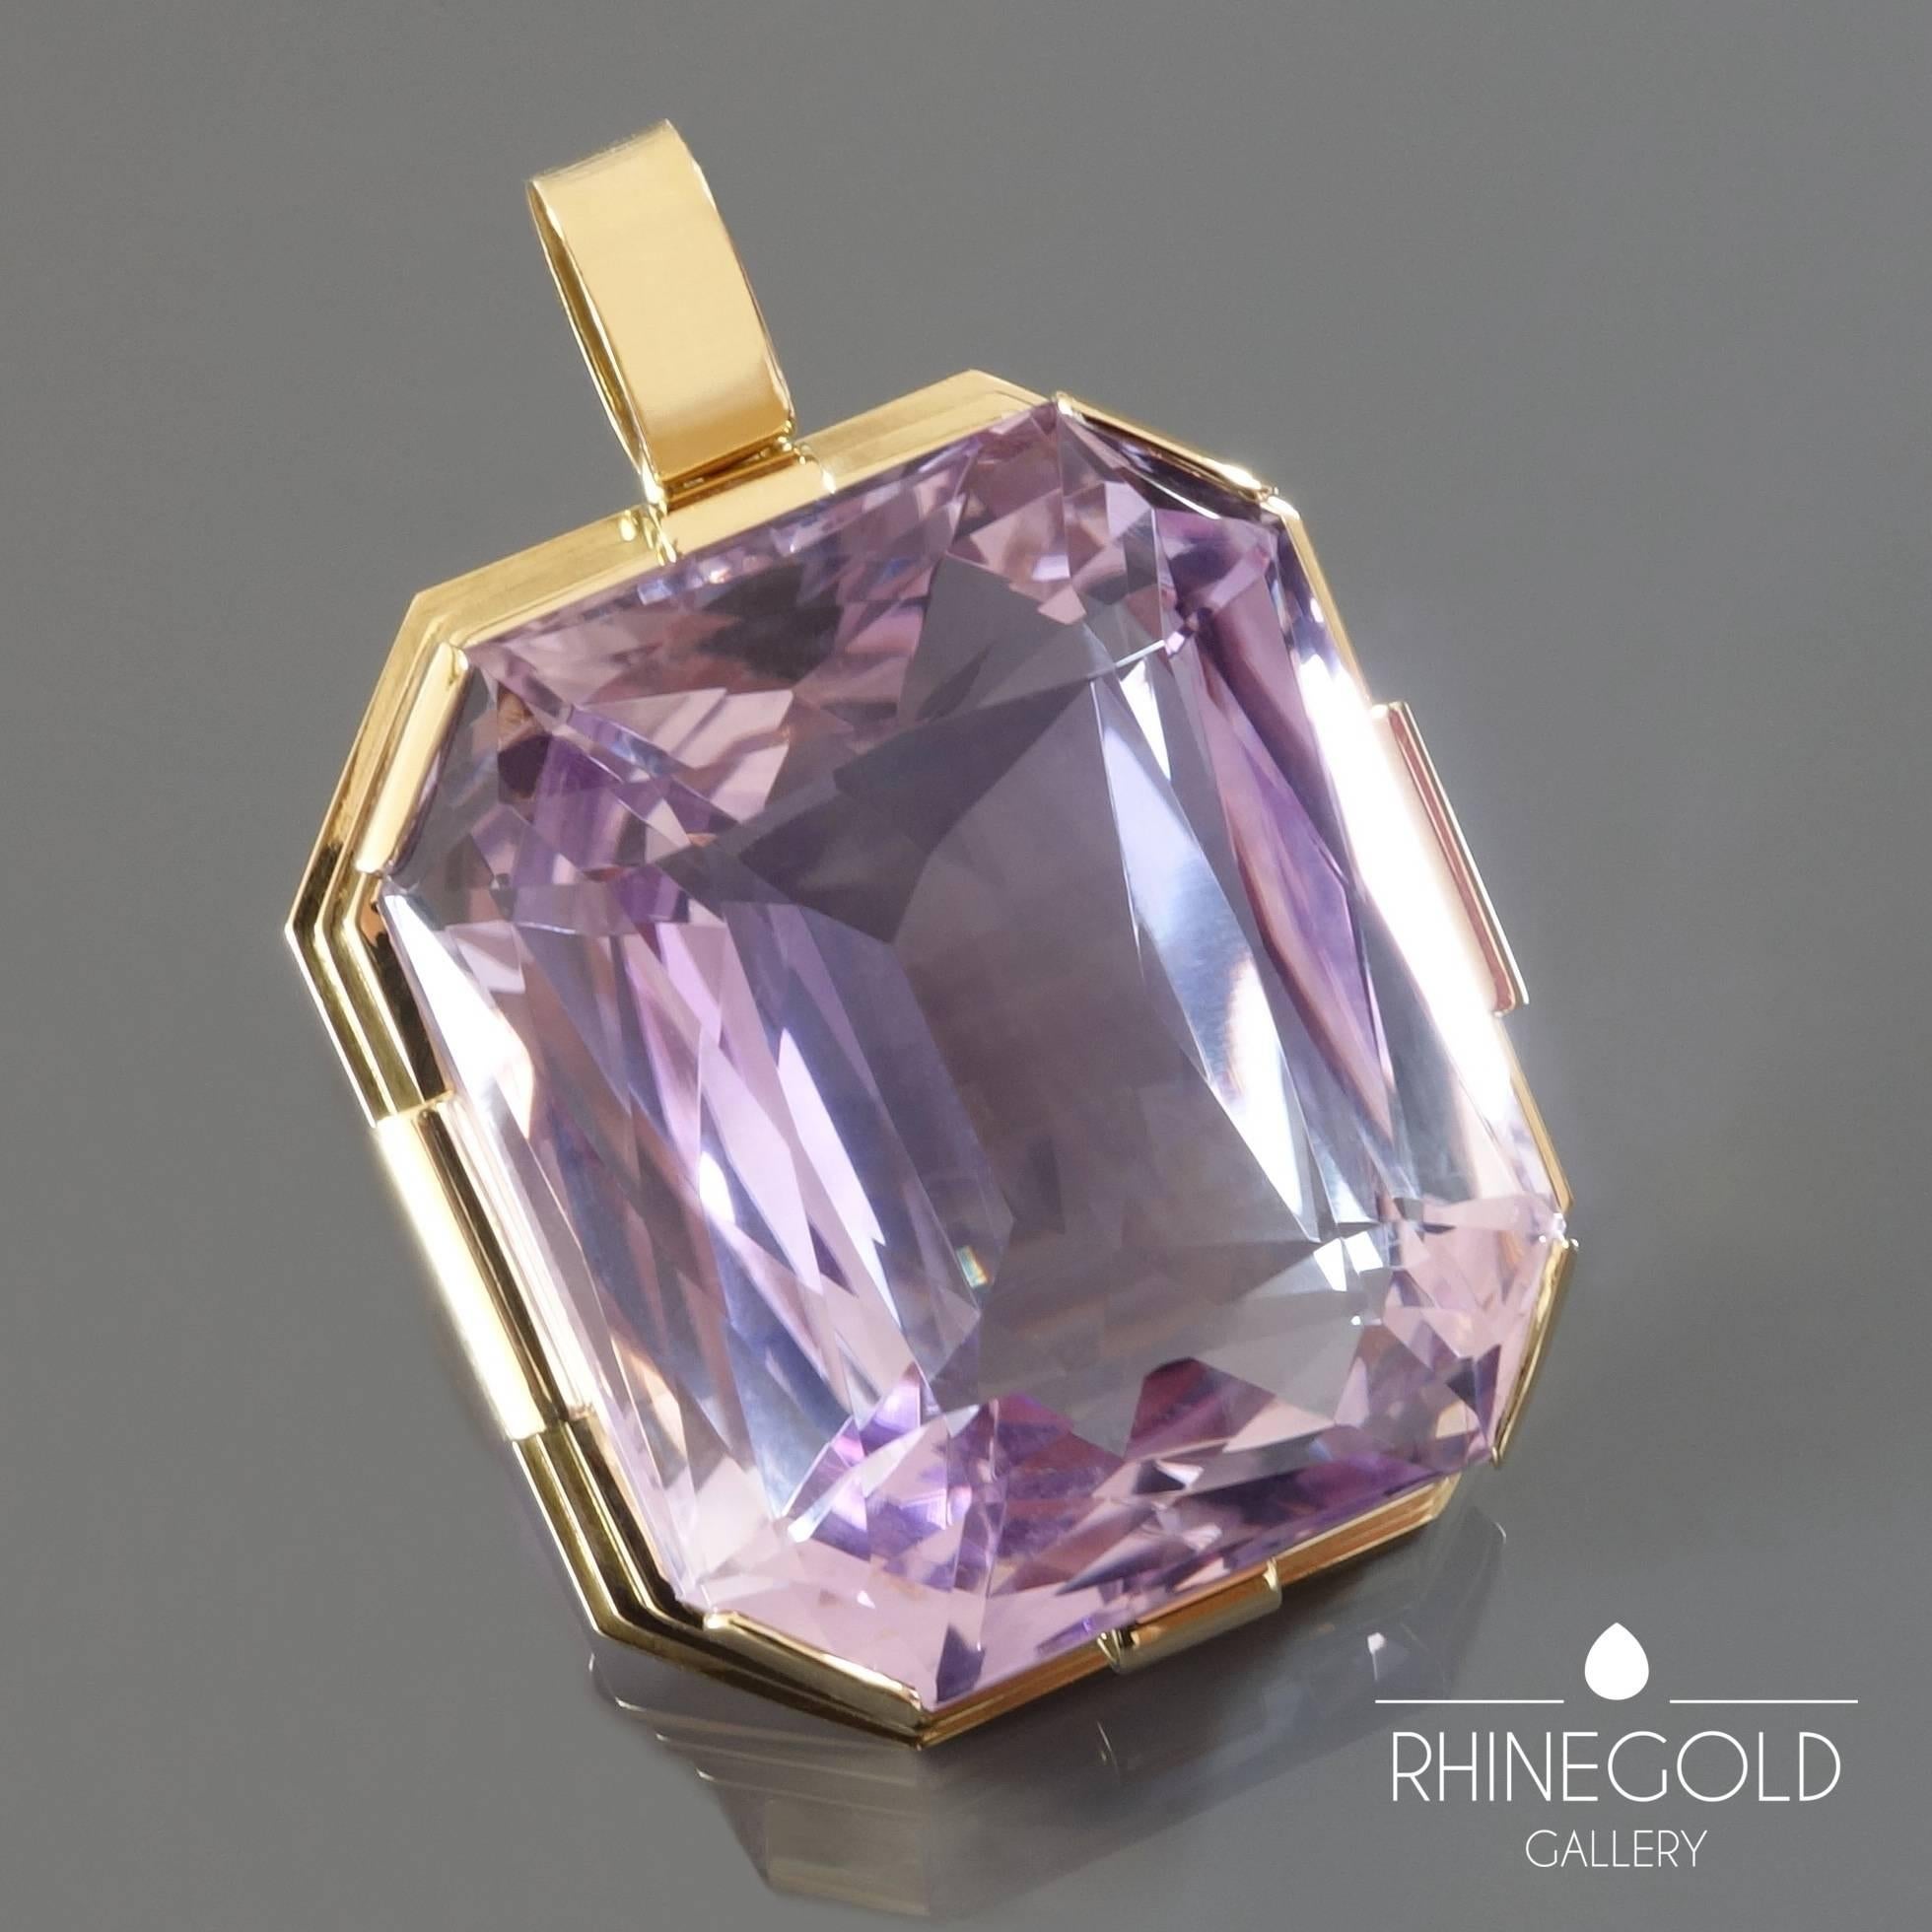 Art Deco 145.3 Carat Gem Quality Amethyst Gold Pendant 
18k yellow gold, amethyst of 145.31 carat
Height incl. bail 5.1 cm (approx. 2”), width 3.6 cm (approx. 1 7/16”), depth 1.9 cm (approx. ¾”)
Weight approx. 53 grams
Marks: gold content mark ‘750’